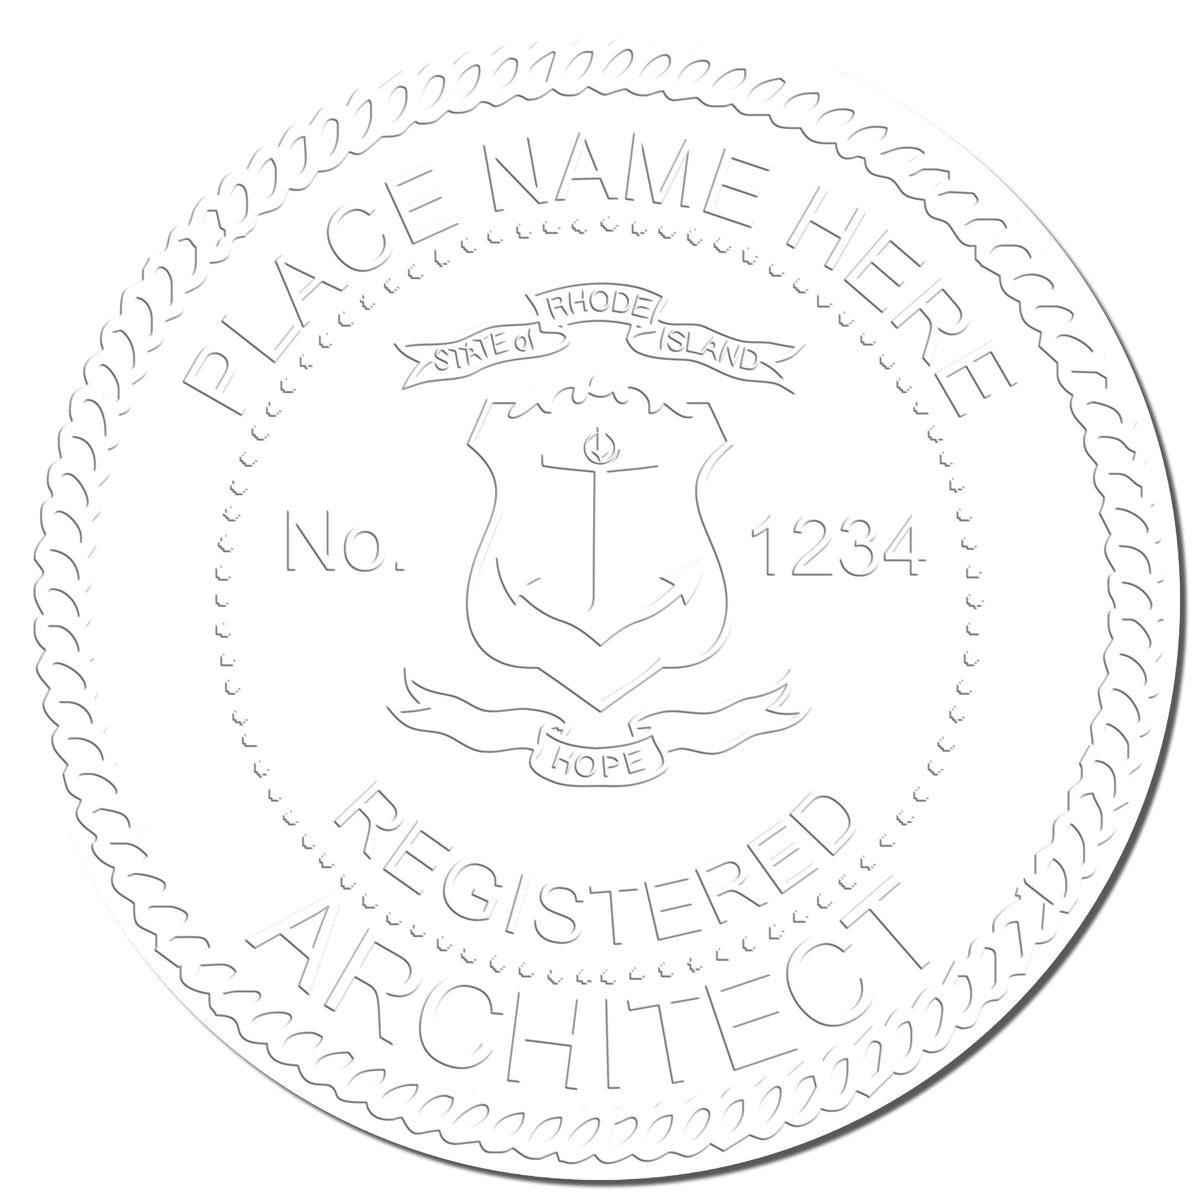 This paper is stamped with a sample imprint of the Gift Rhode Island Architect Seal, signifying its quality and reliability.